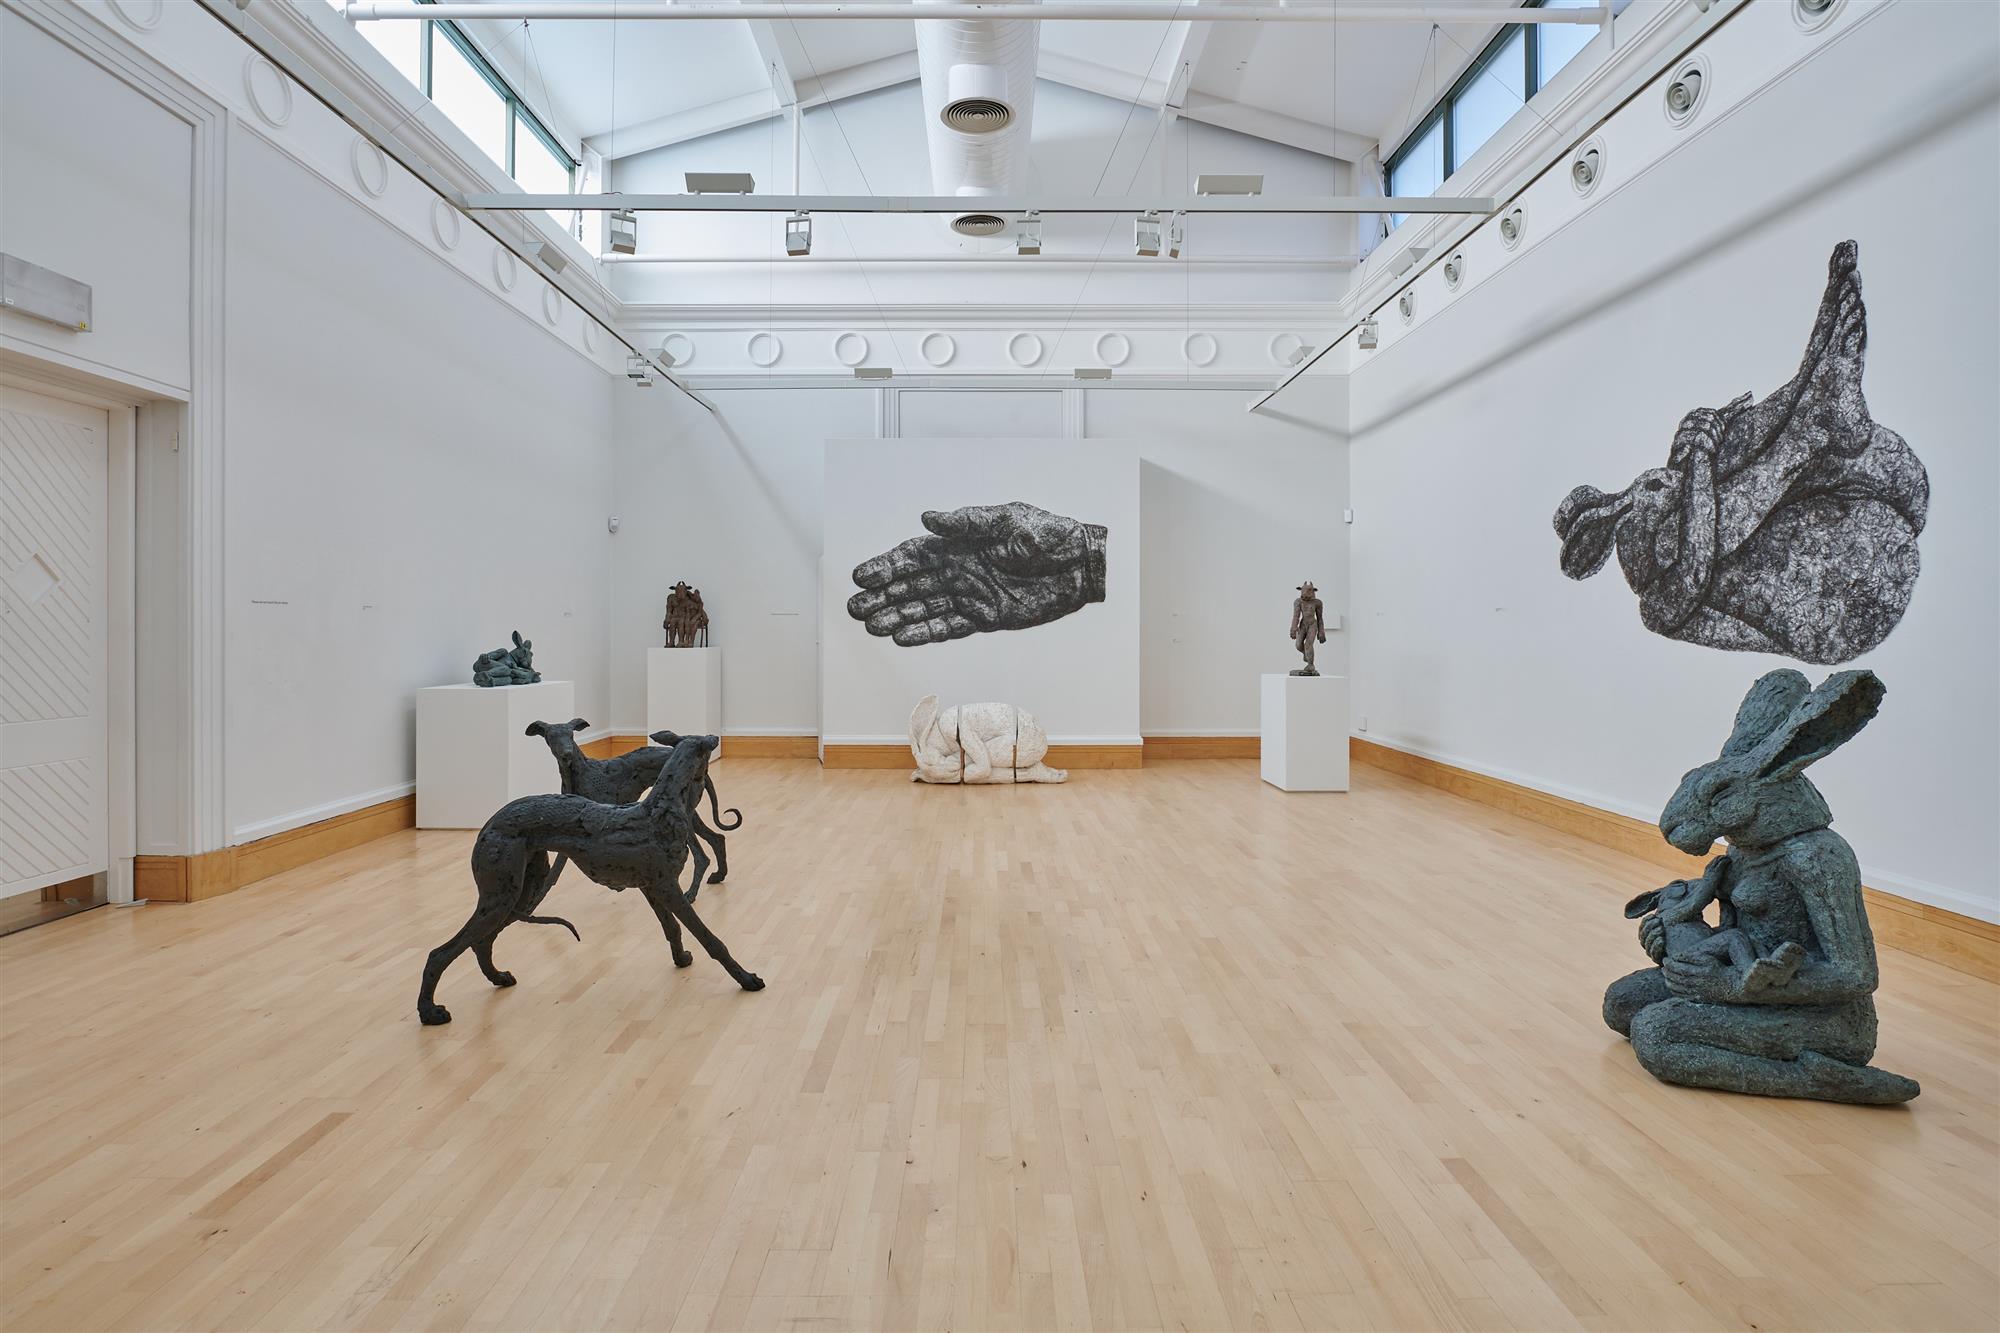 A gallery space filled with bronze sculptures